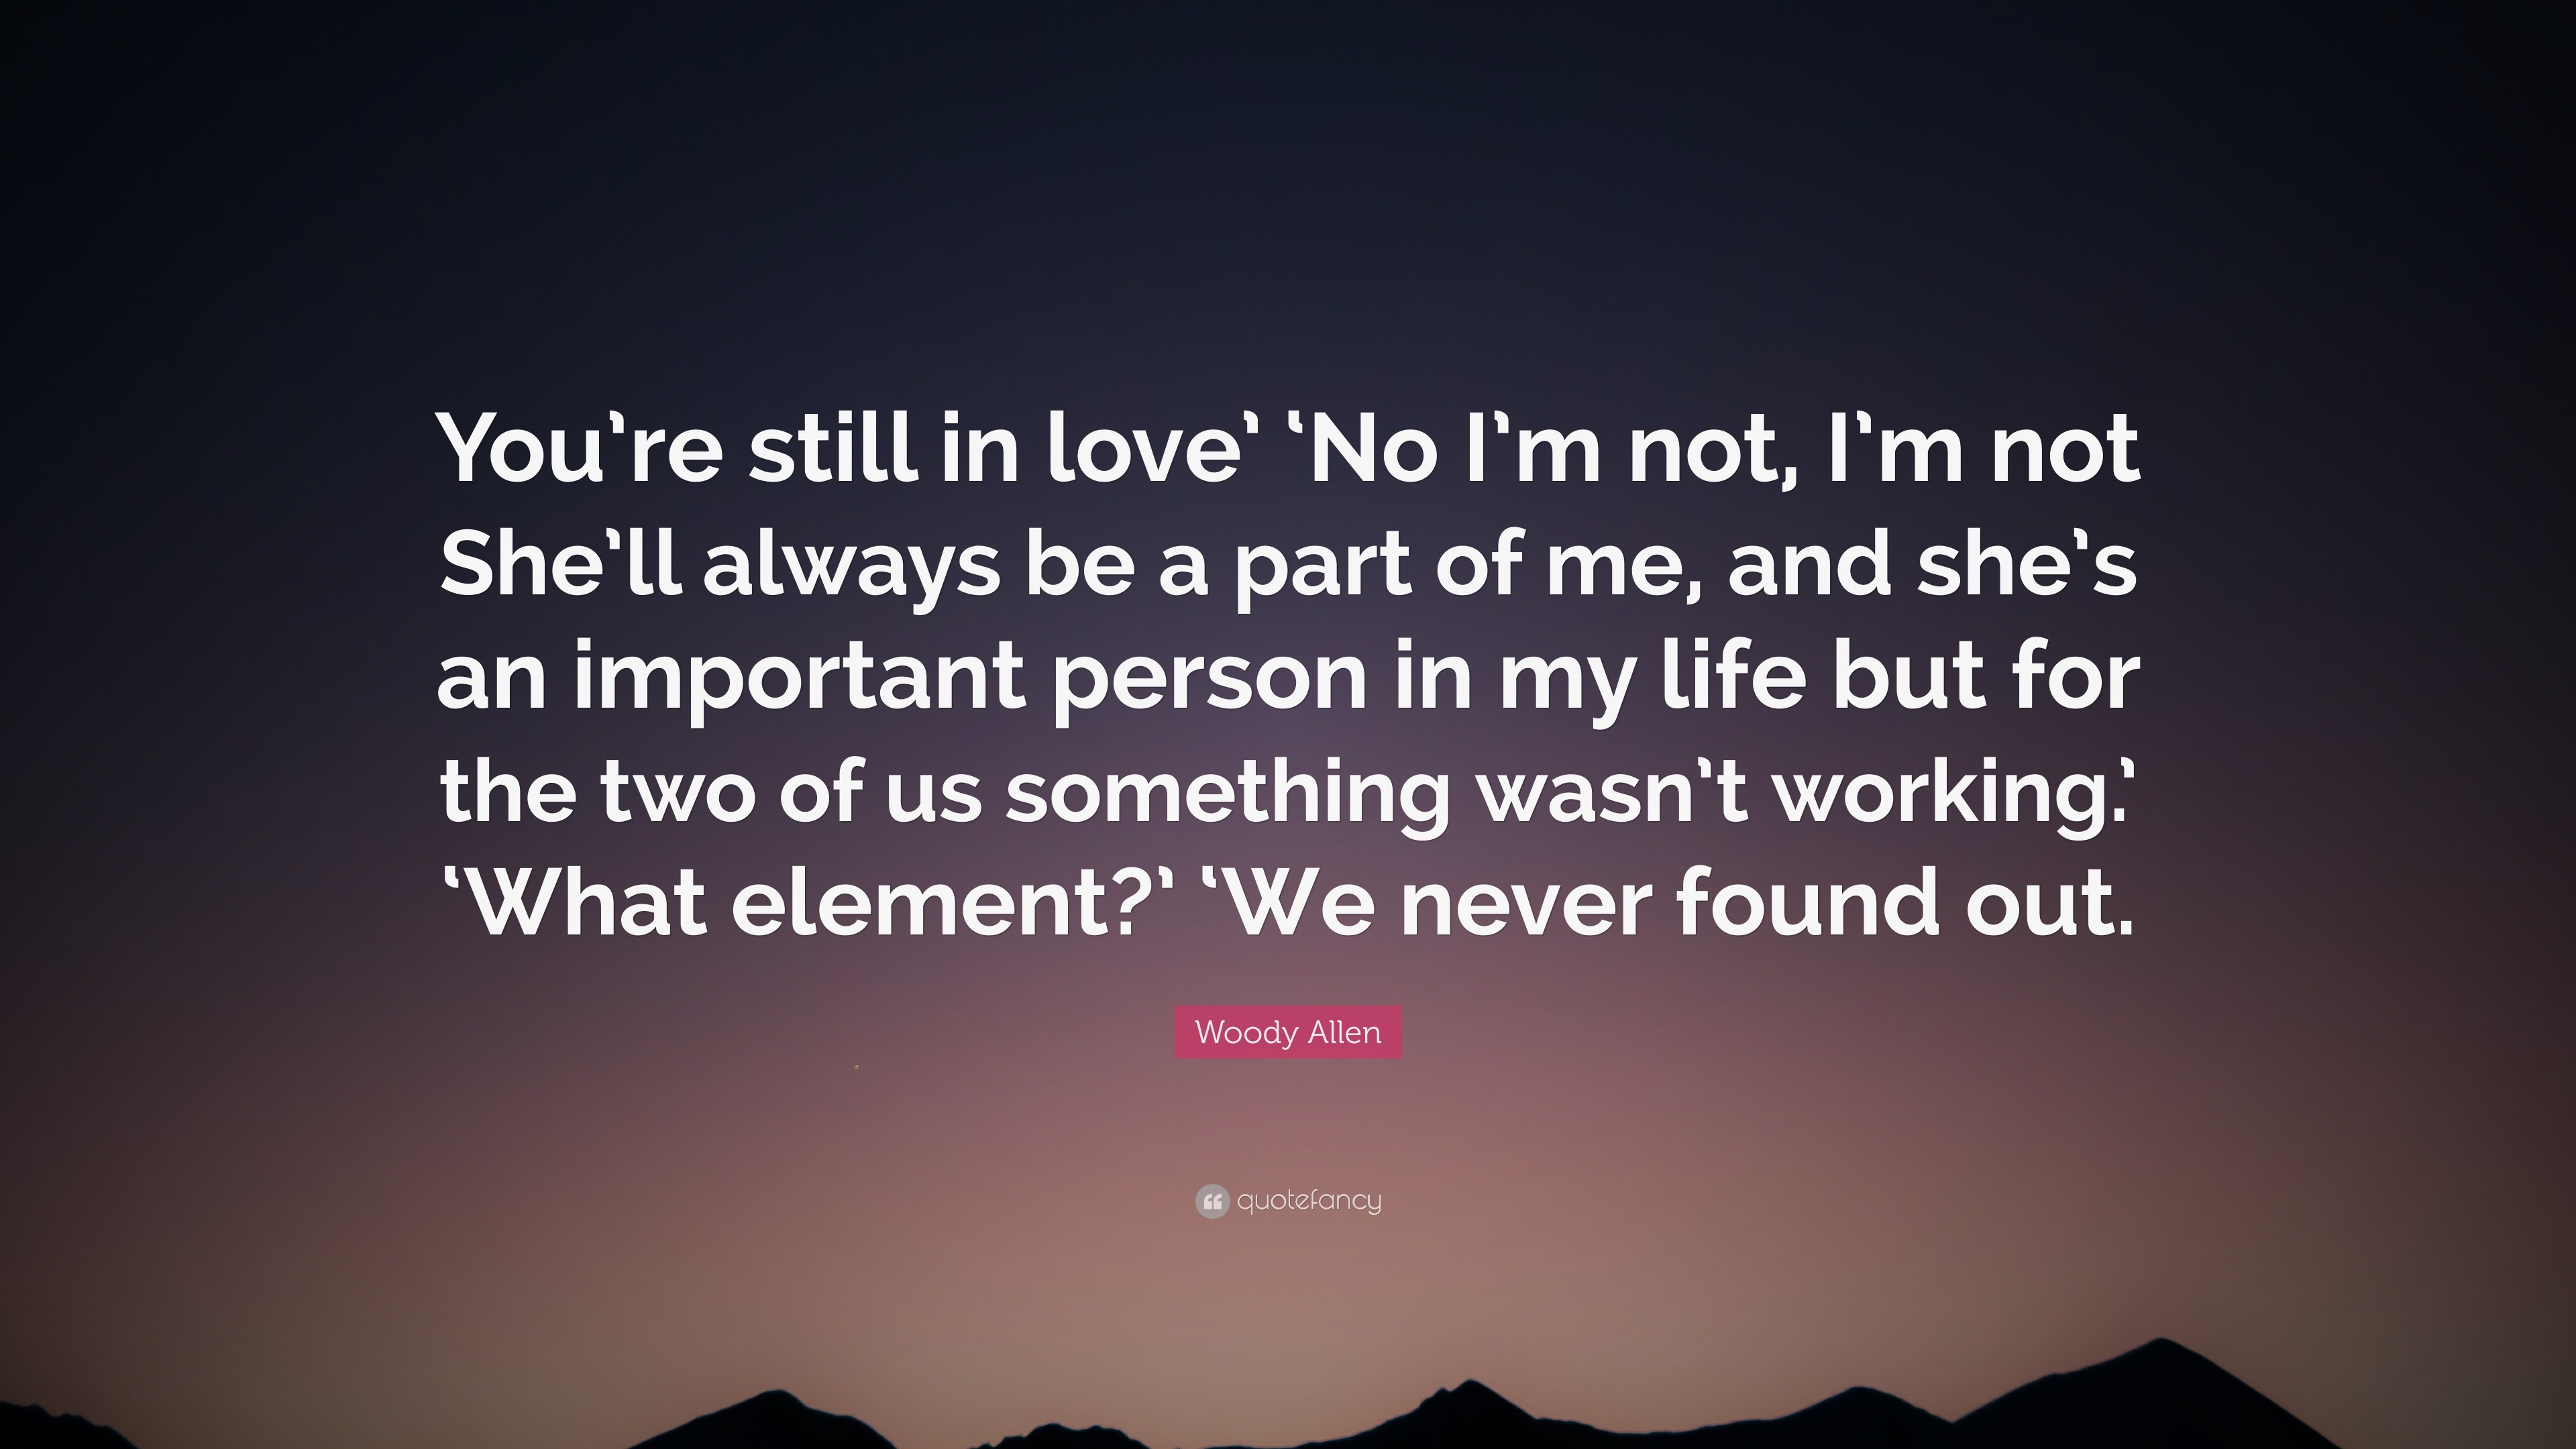 Woody Allen Quote “You re still in love No I